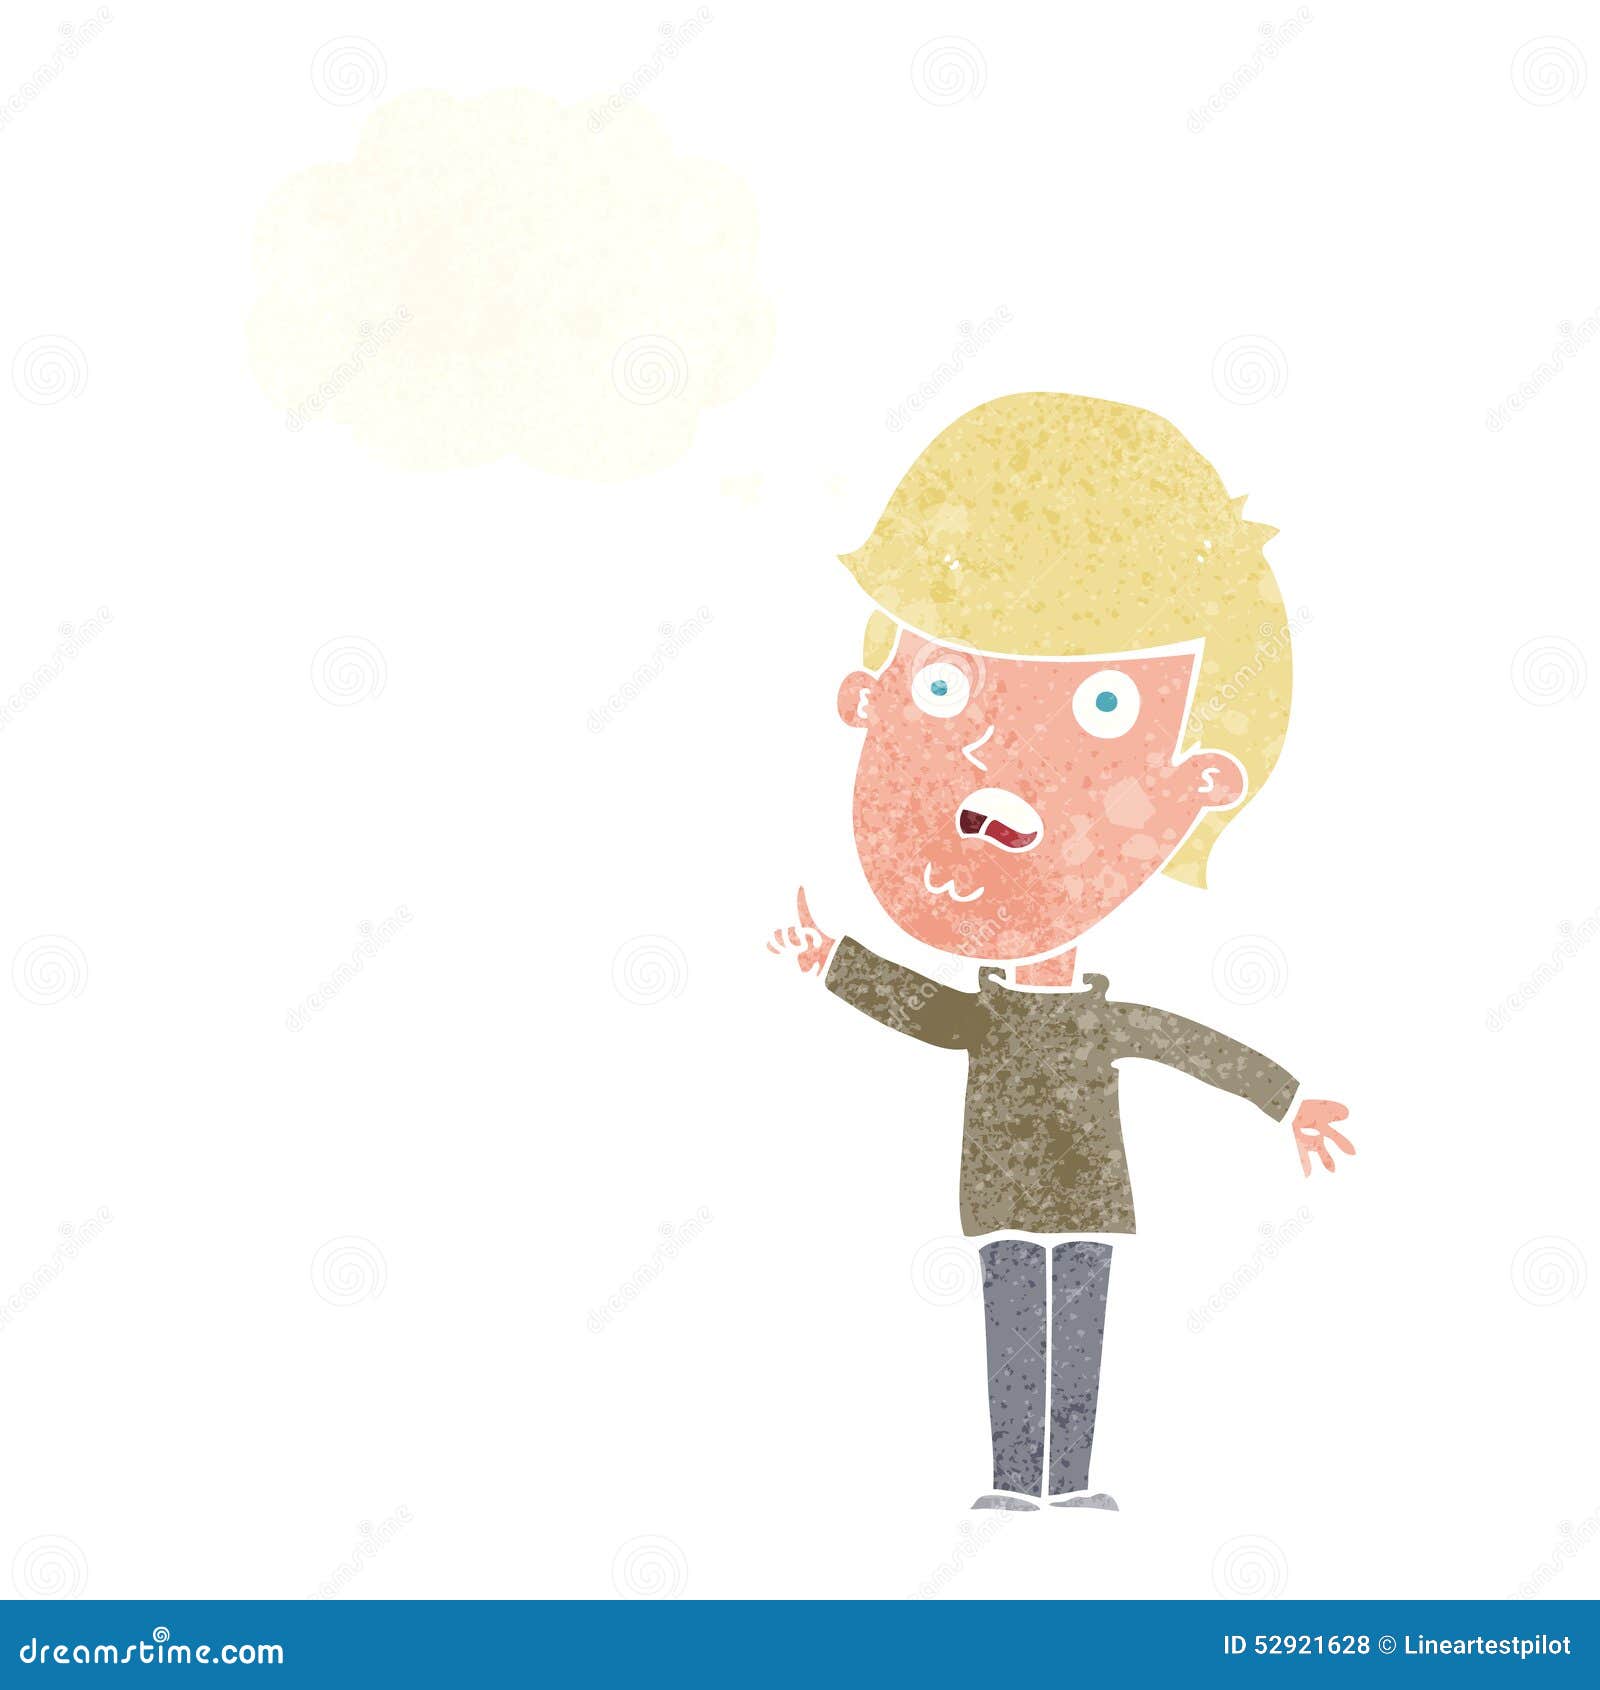 Cartoon Man Asking Question With Thought Bubble Stock Illustration